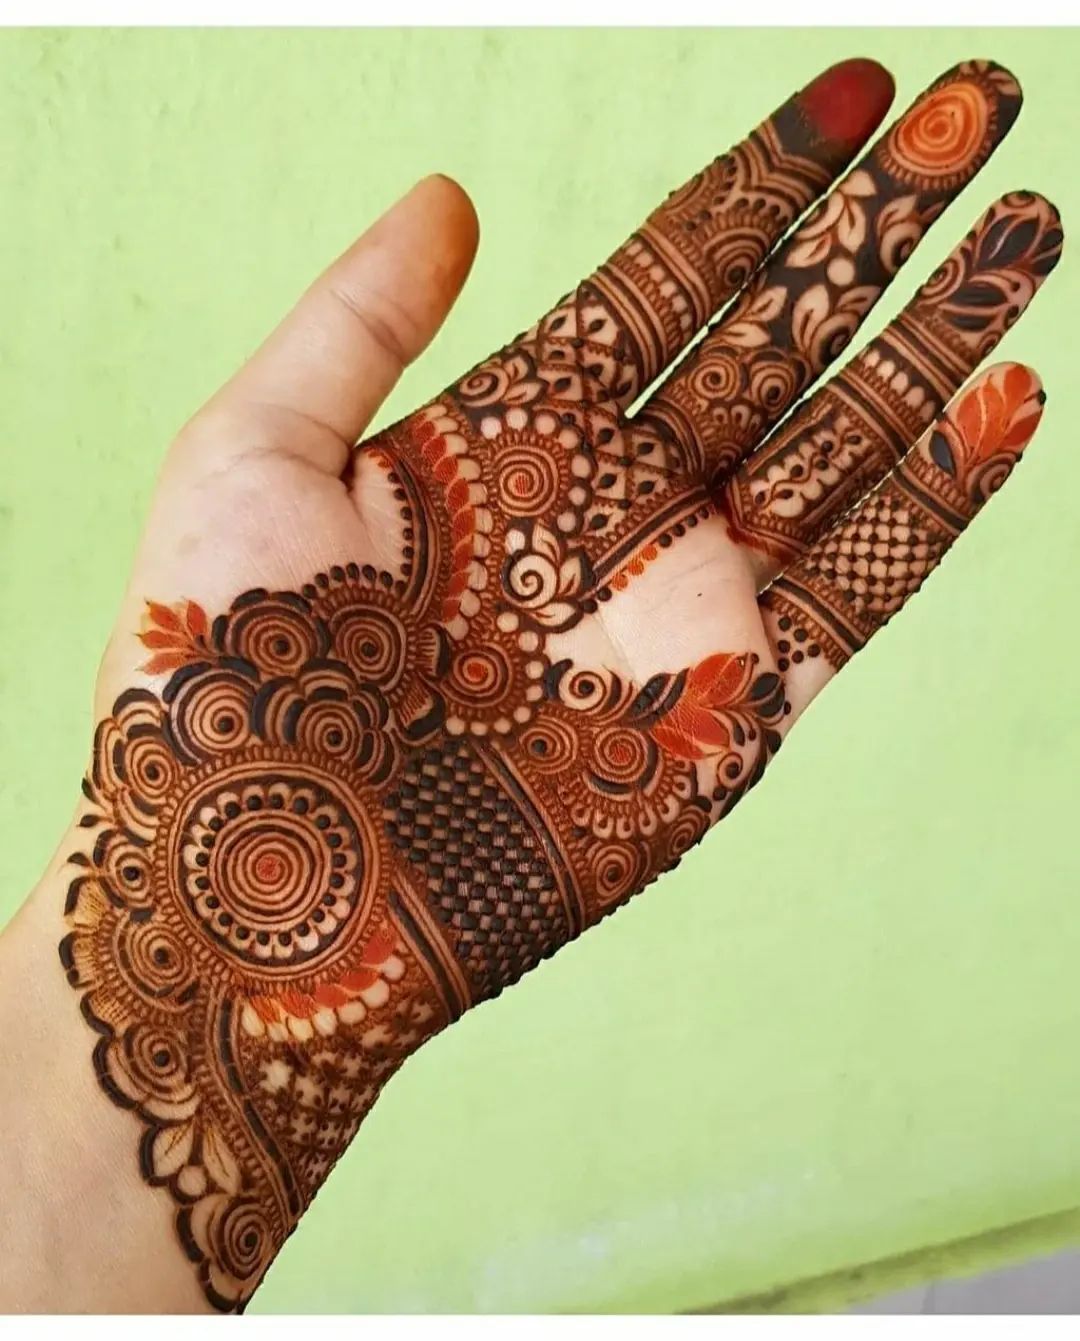 New Collection of Modern Mehndi Designs For Hands and Feet - Glossnglitters-cacanhphuclong.com.vn